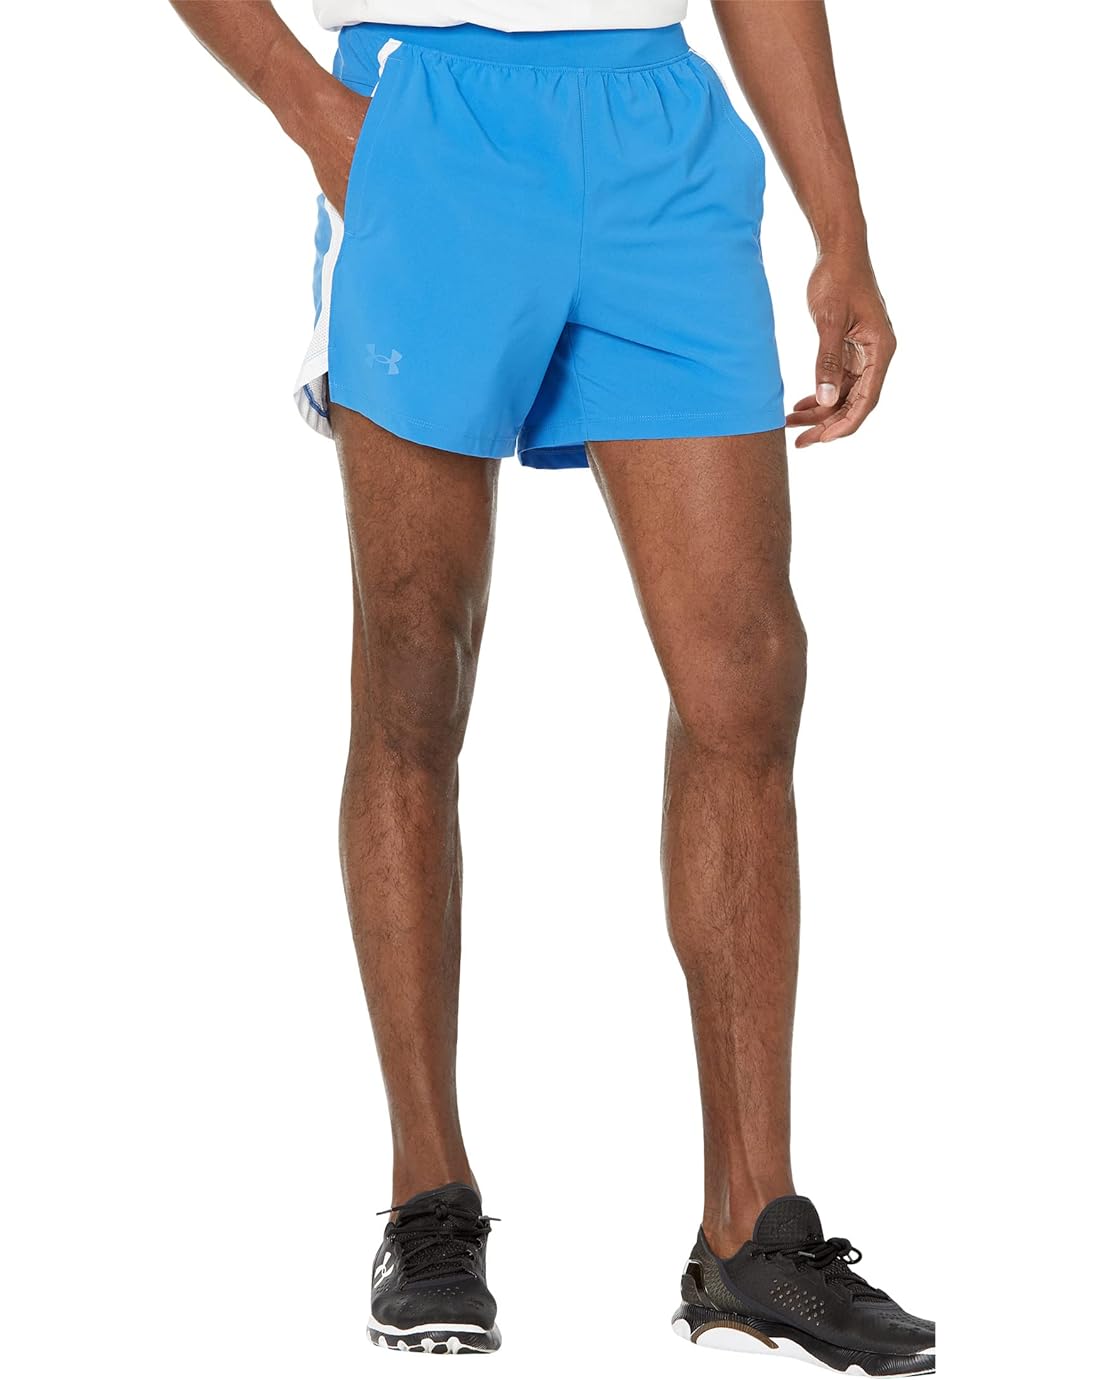 Under Armour Launch Stretch Woven 5 Shorts